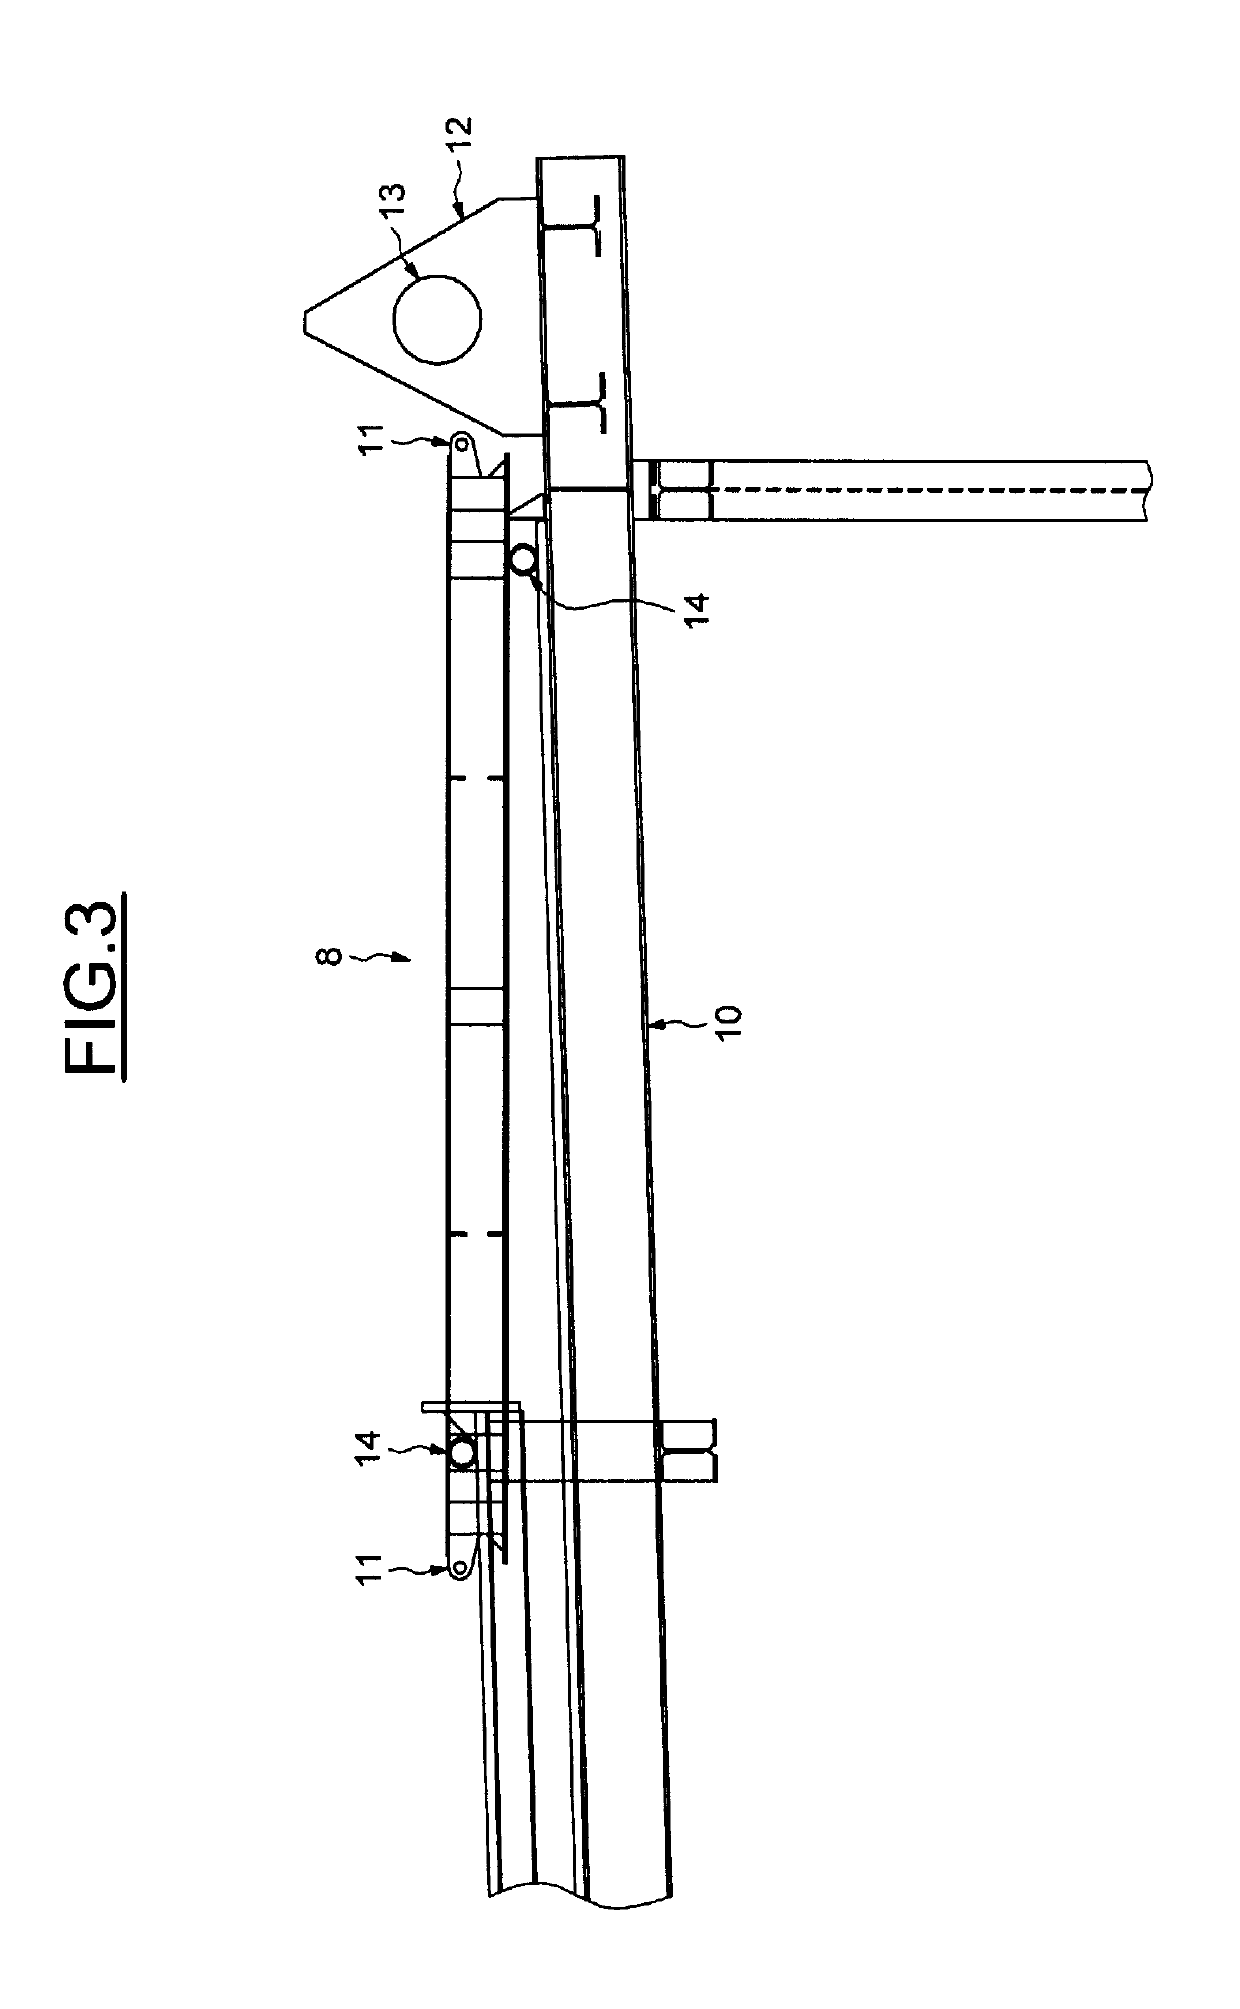 Gas turbine exhaust diverter system duct guide rails